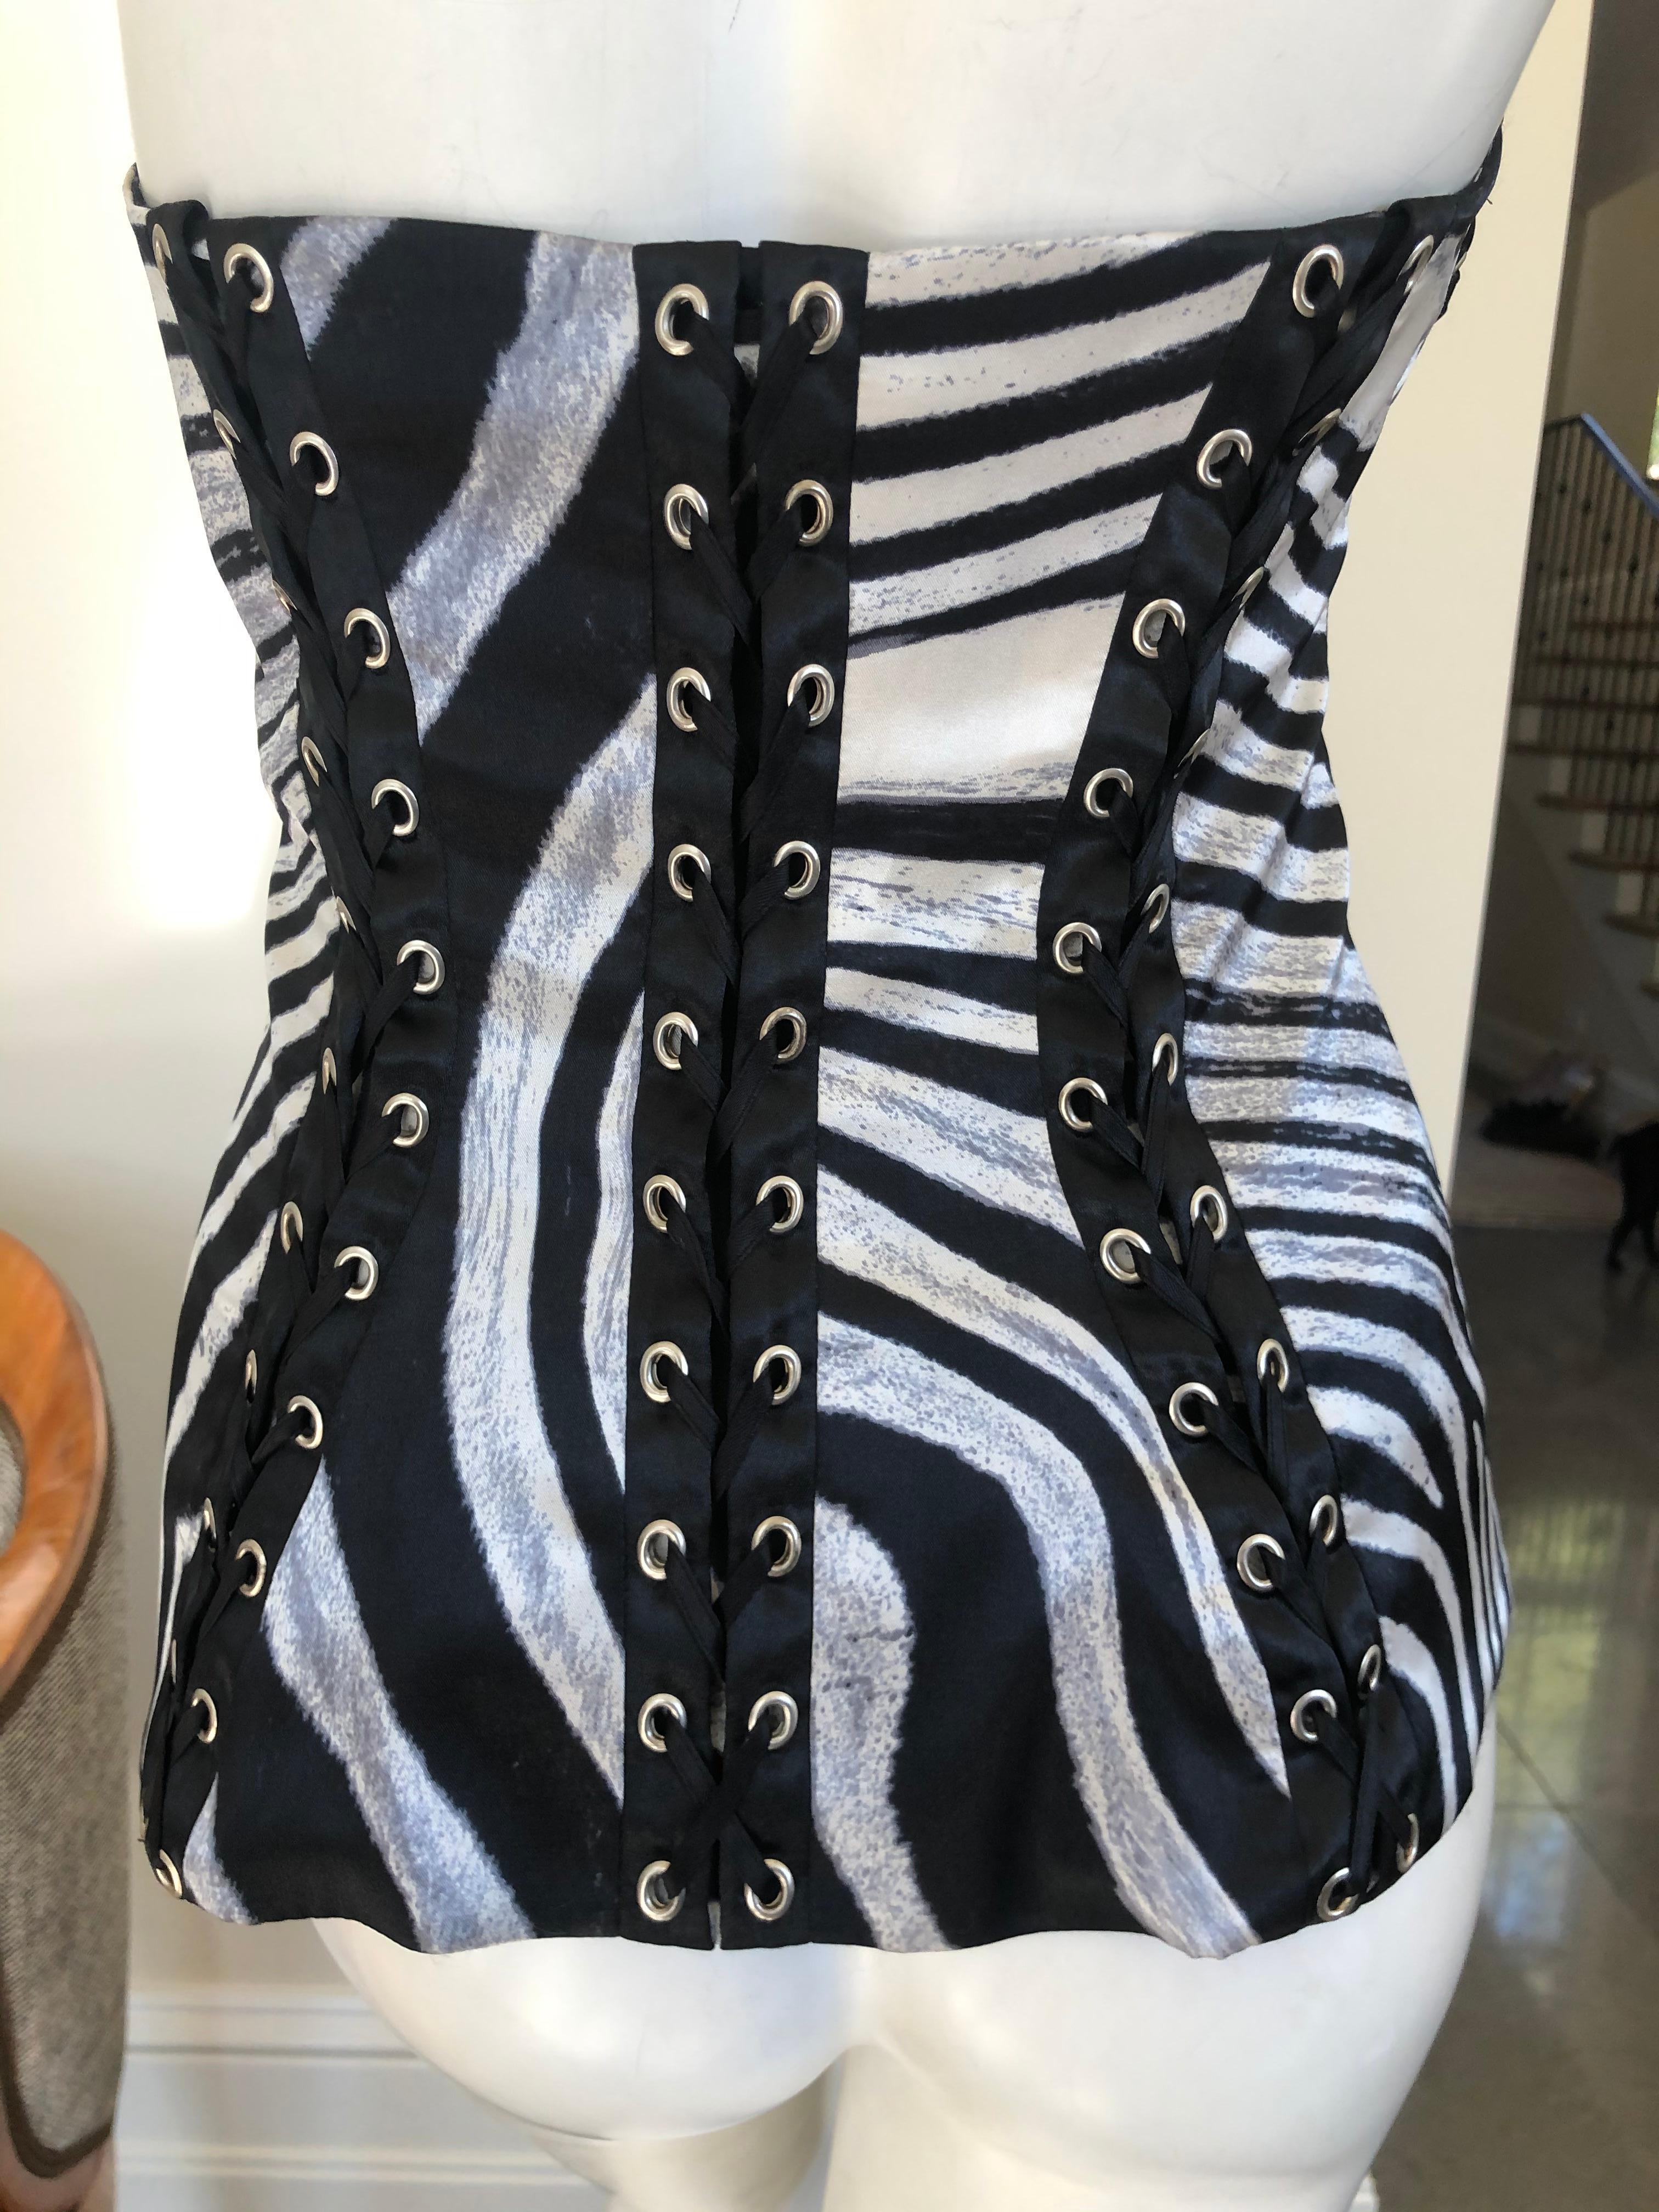 Roberto Cavalli for Just Cavalli Zebra Print Corset with Lace Up Details  In Excellent Condition For Sale In Cloverdale, CA